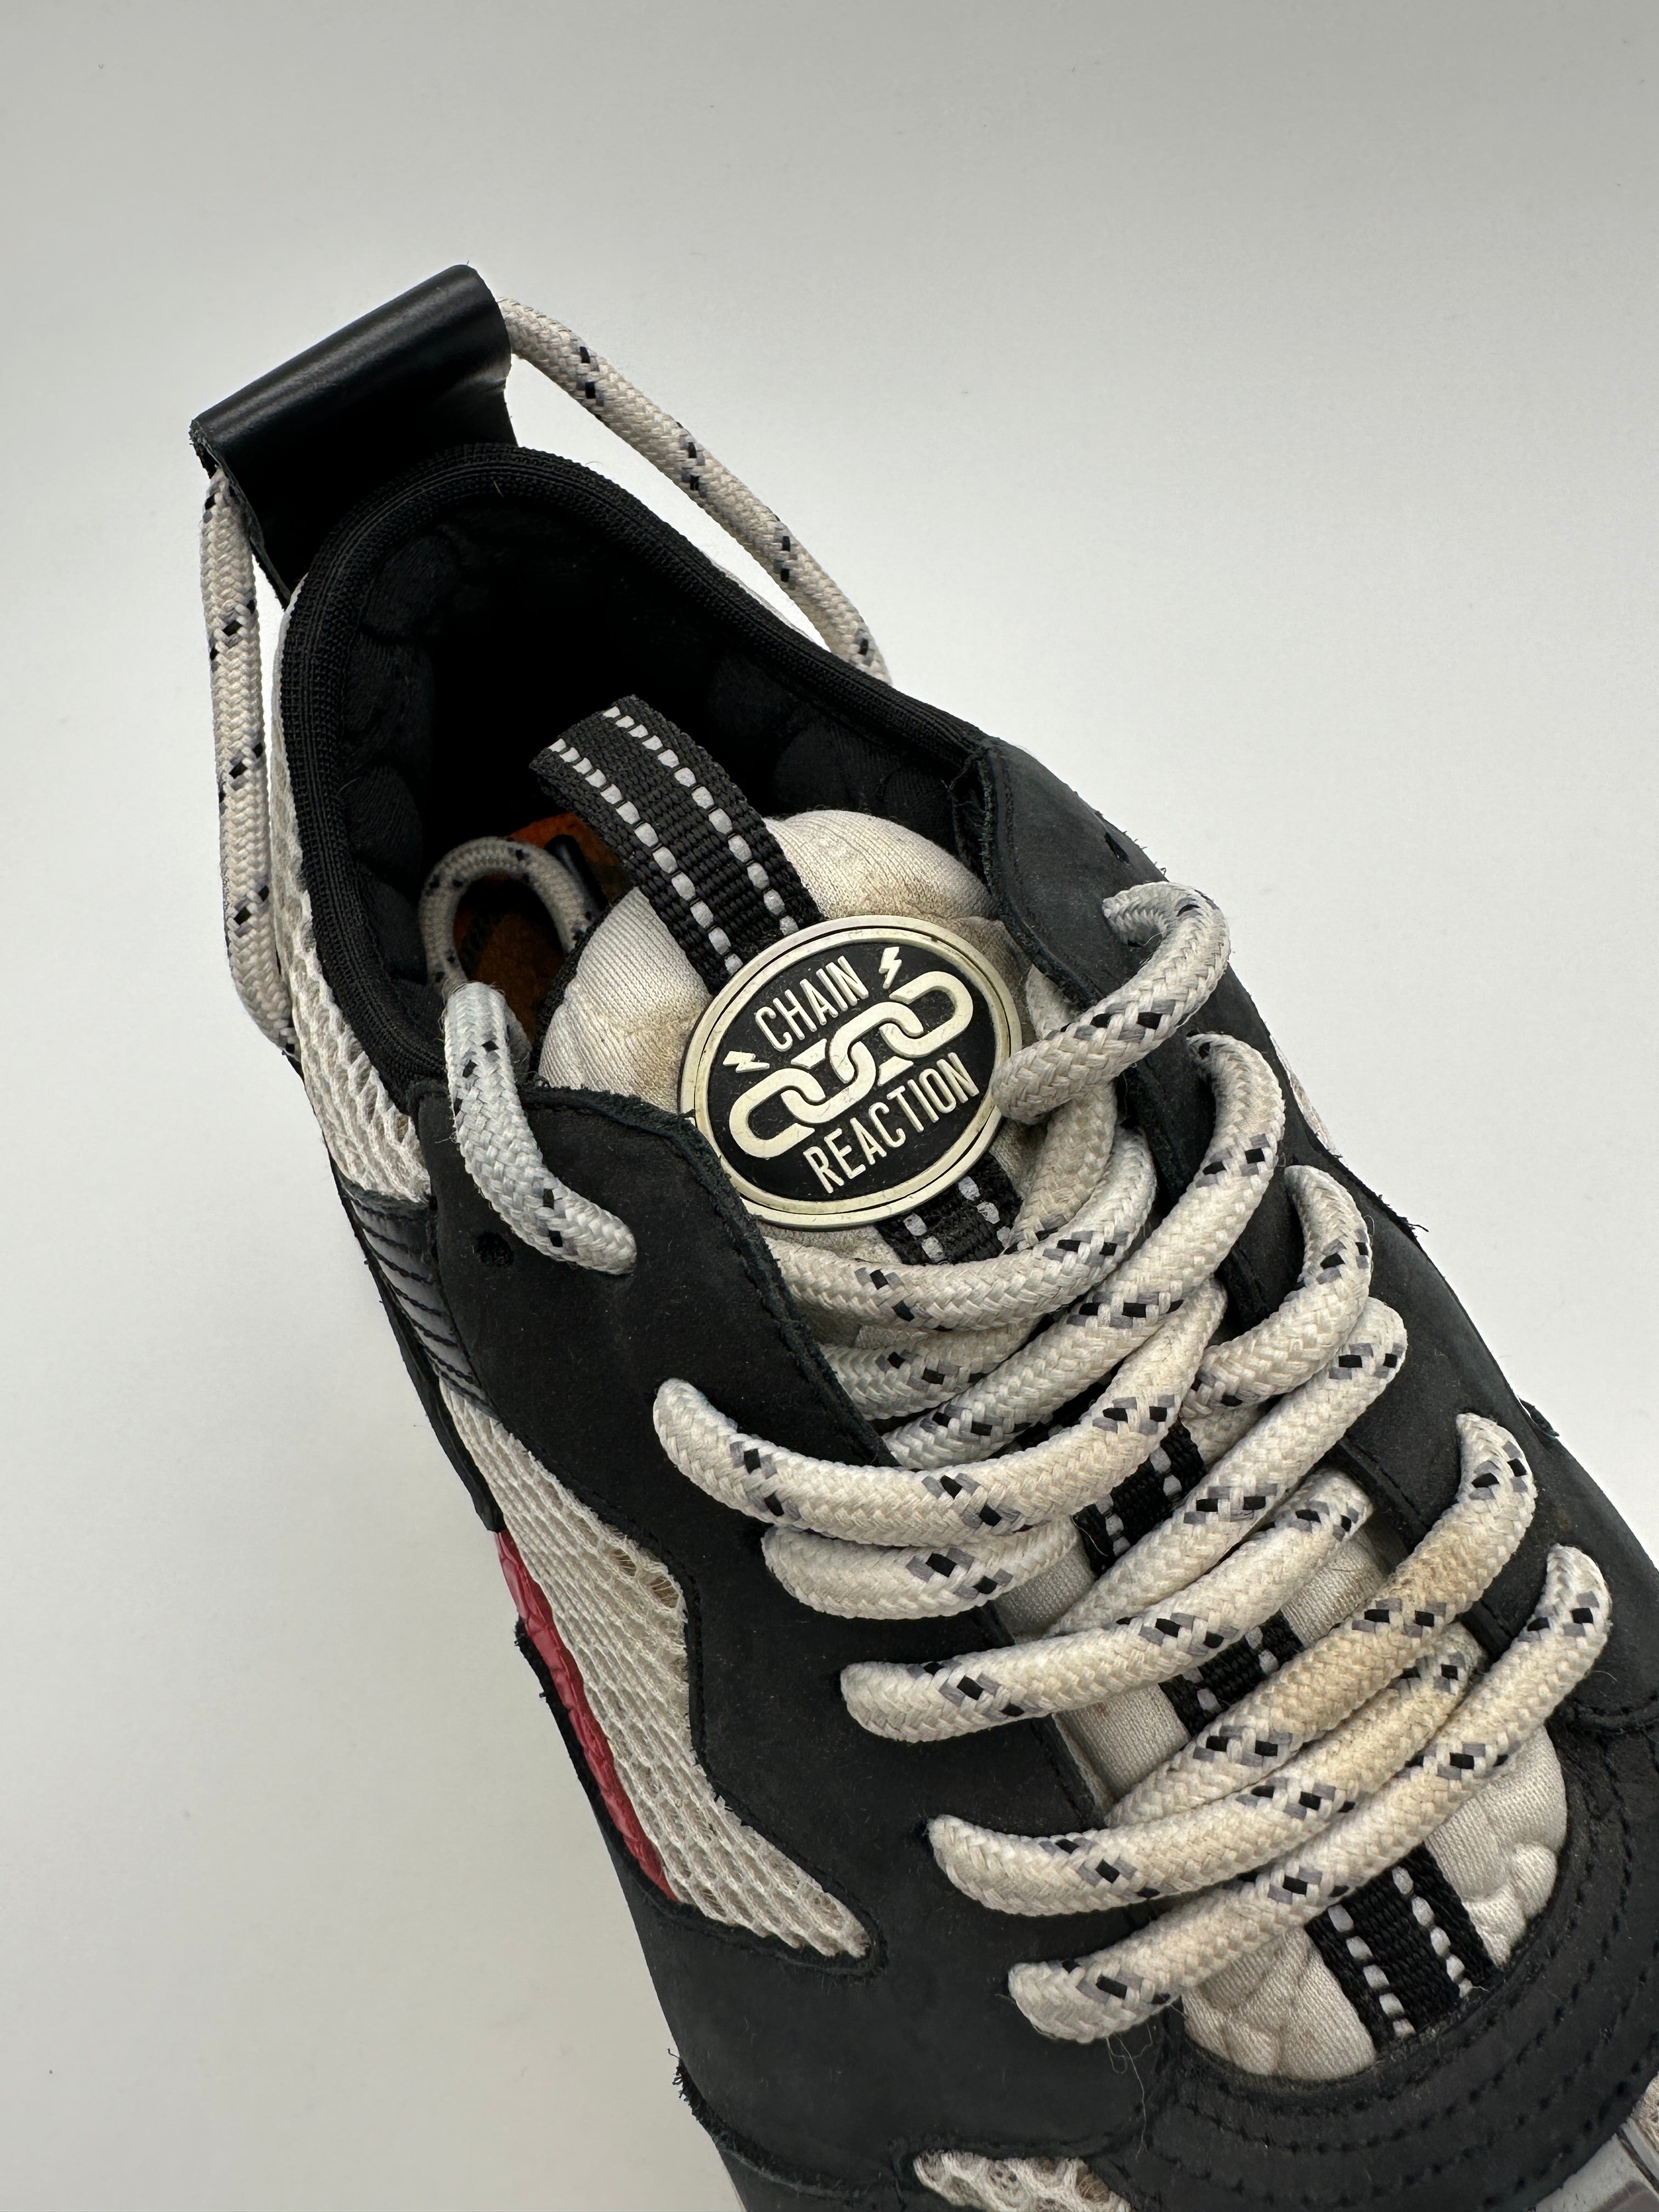 Chain Reaction Sneakers